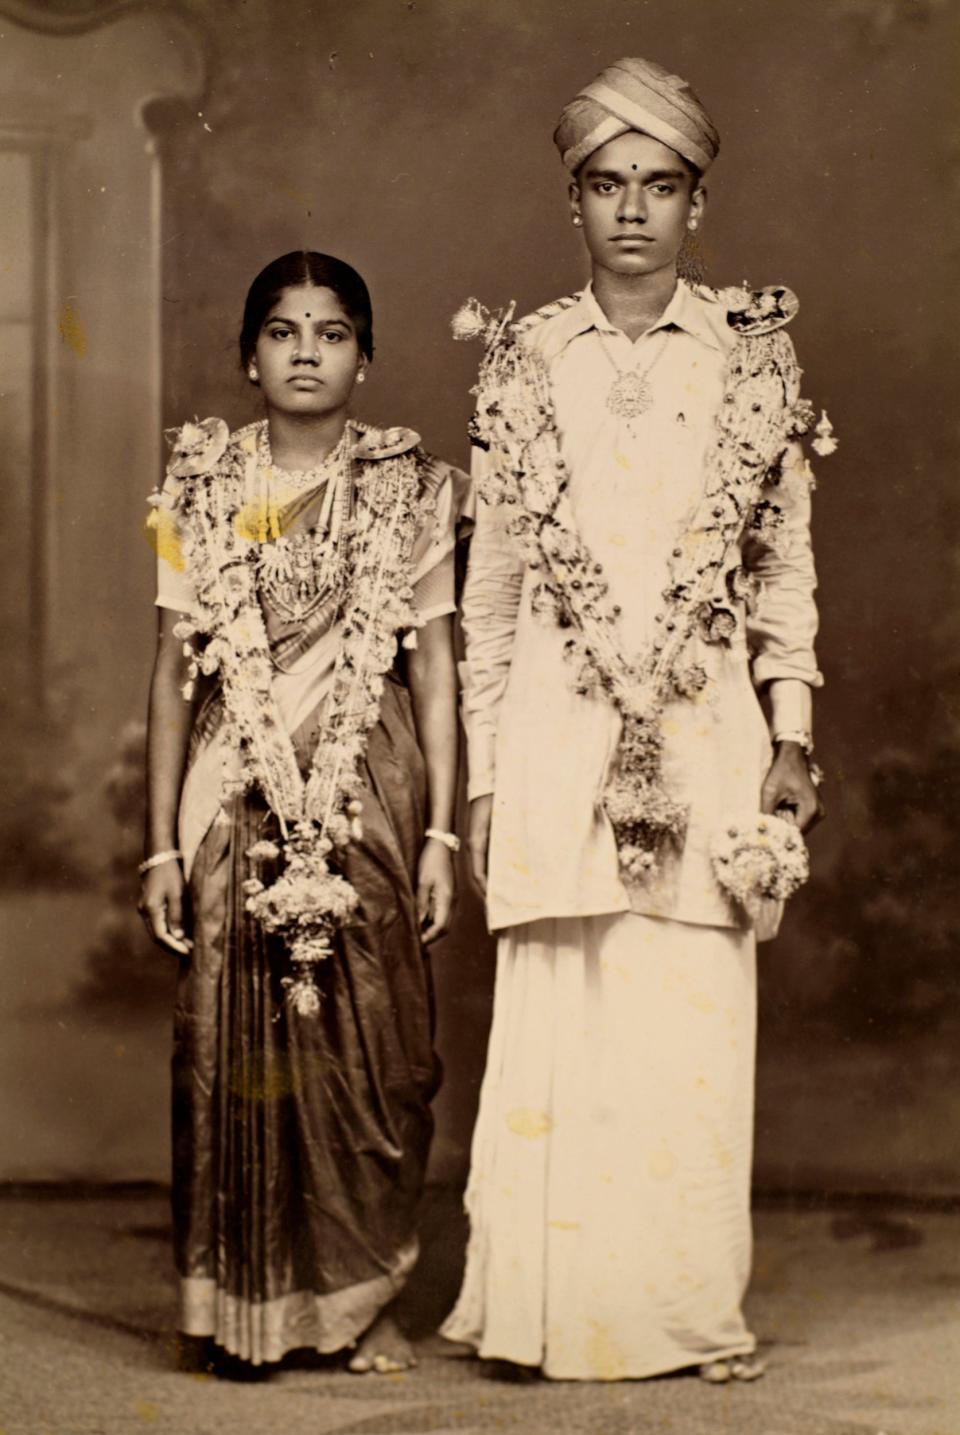 A family photograph of two Chettians wearing cultural garb.